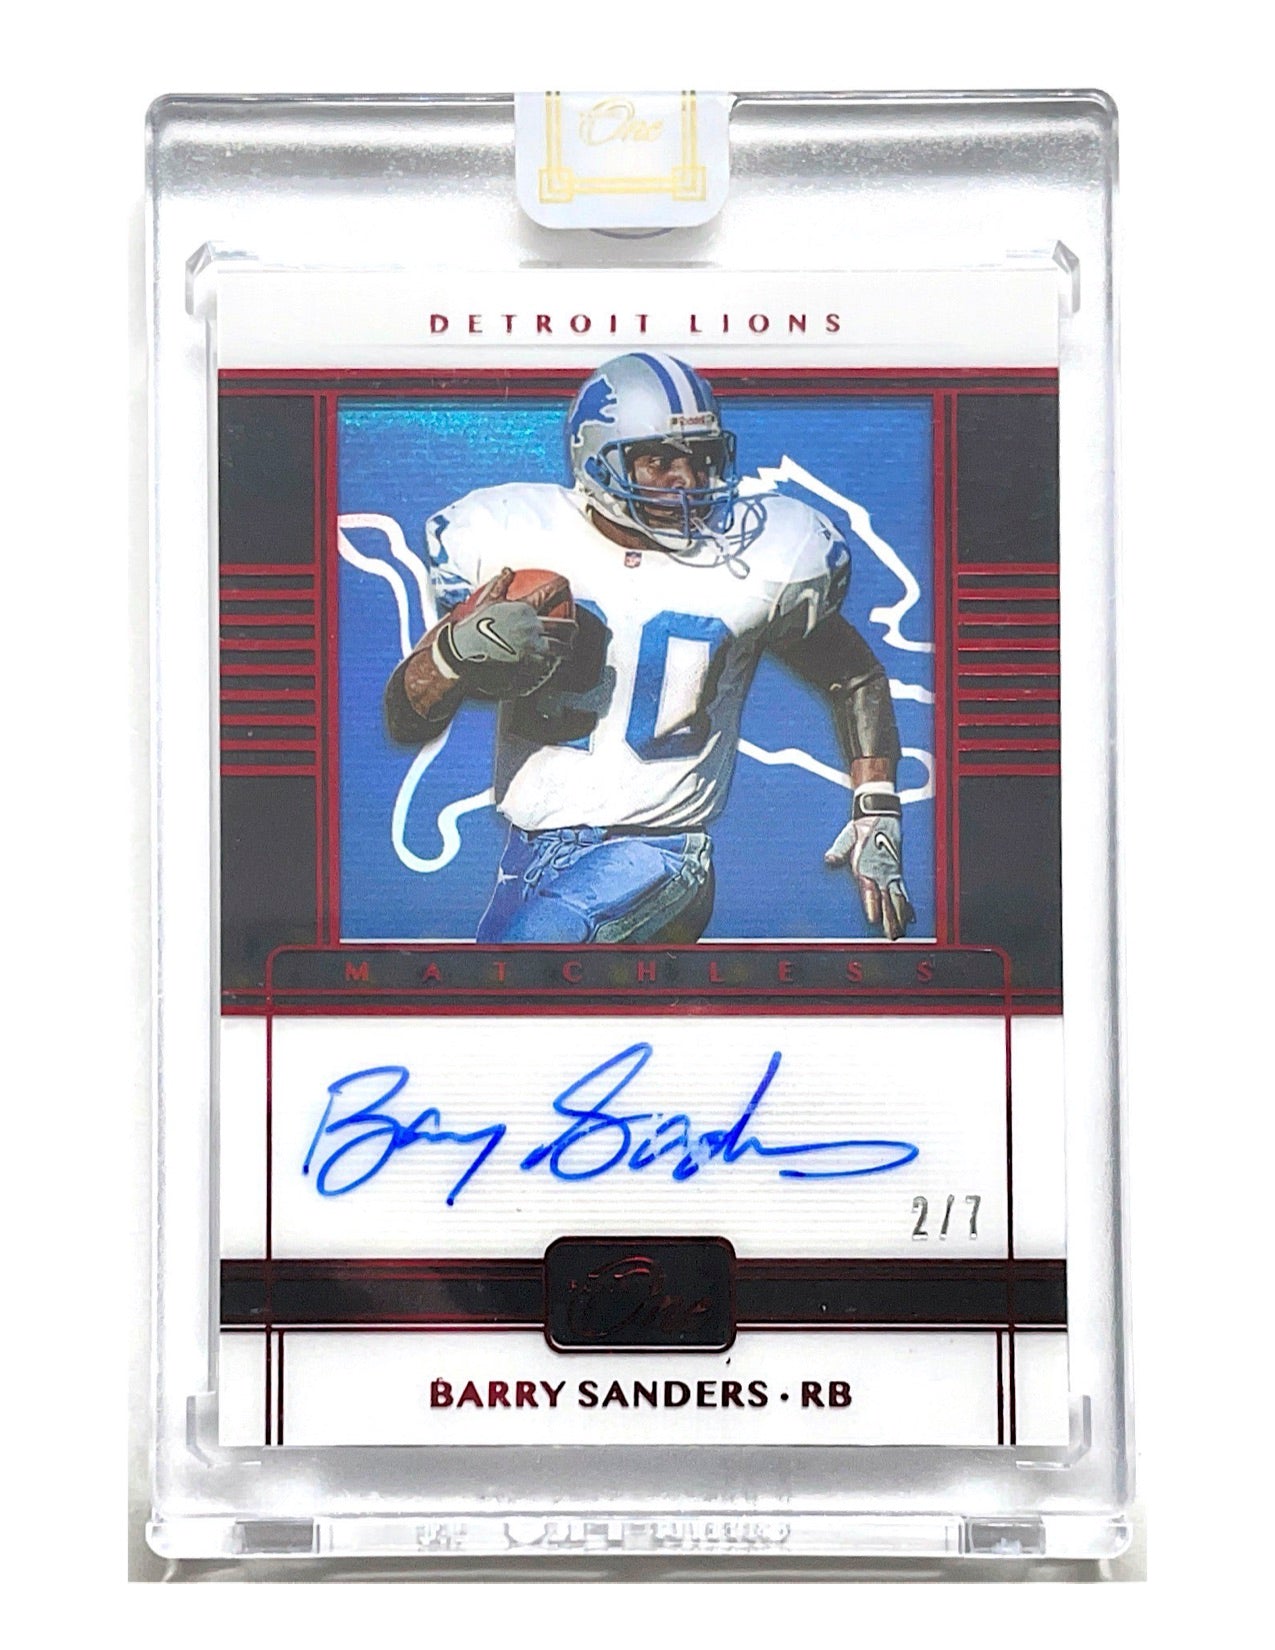 Barry Sanders 2019 Panini One Matchless Autograph #188 - 2/7